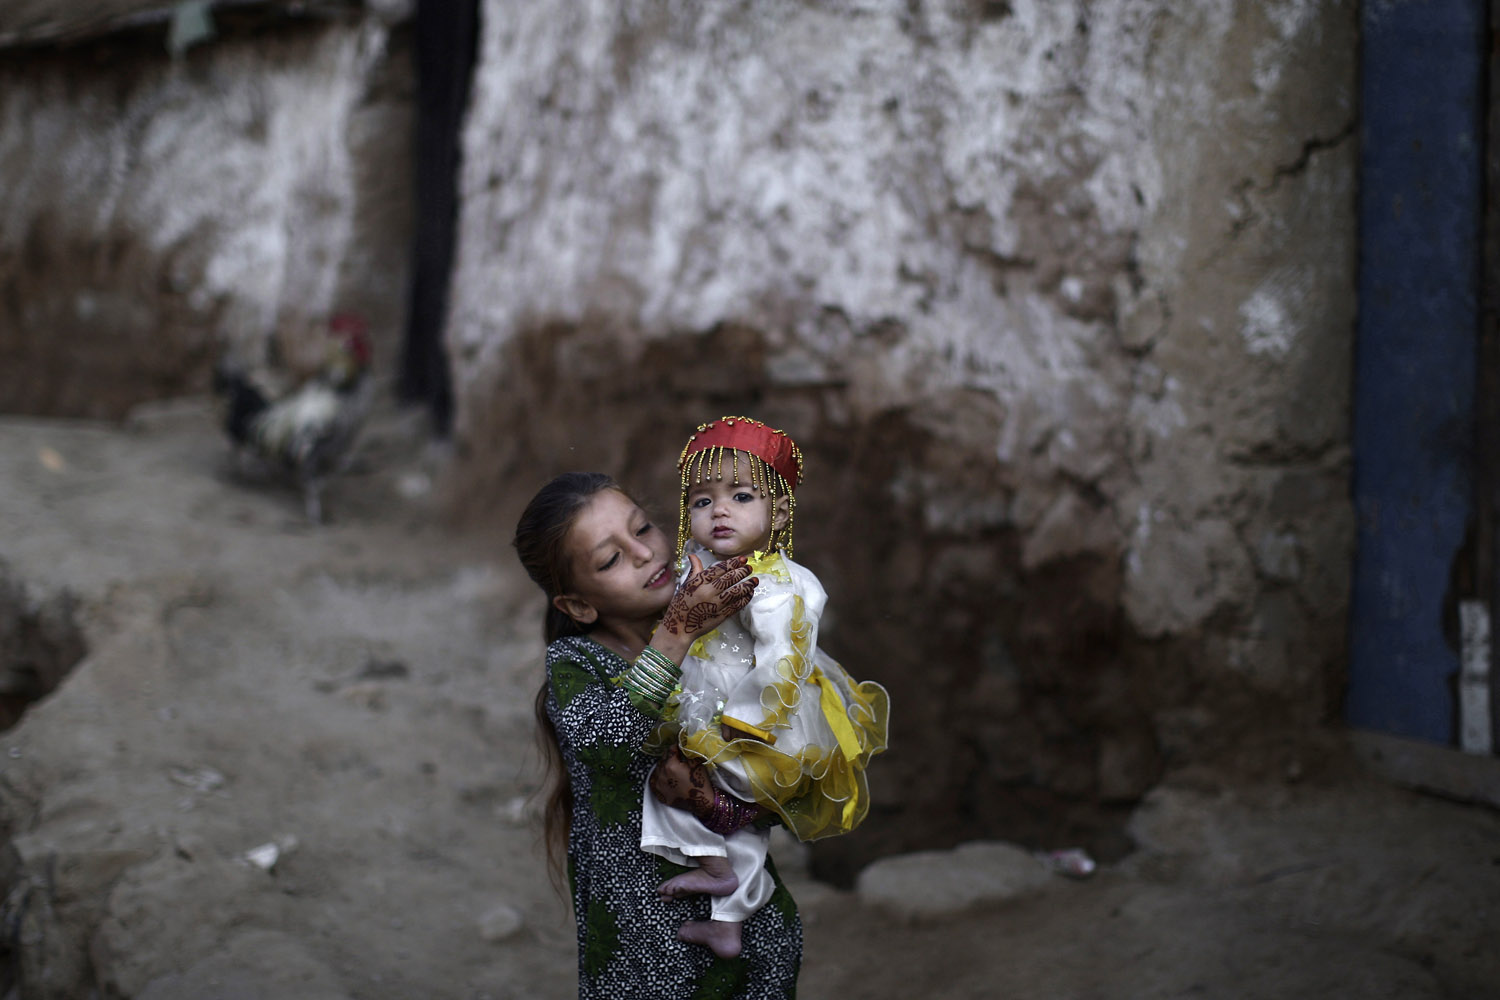 Image: Oct. 27, 2012. Afghan refugee girl Parveen Bashir, 6, plays with her sister Shaheen, 1, dressed in new clothes, while celebrating the first day of the Muslim holiday of Eid al-Adha, or "Feast of Sacrifice", on the outskirts of Islamabad.